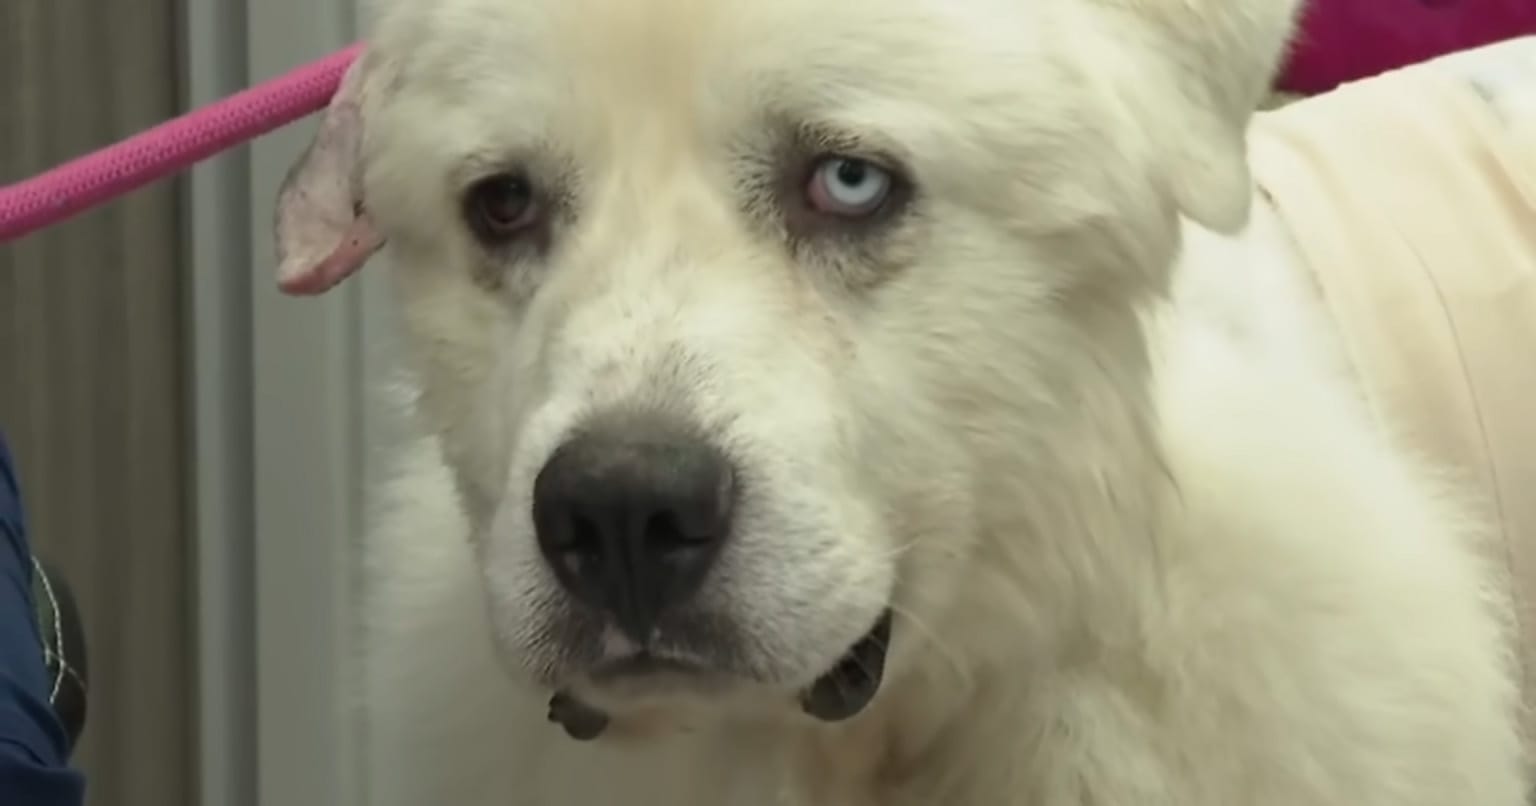 Casper, dog who fought off coyotes to protect his flock of sheep, nominated for “Farm Dog of the Year”